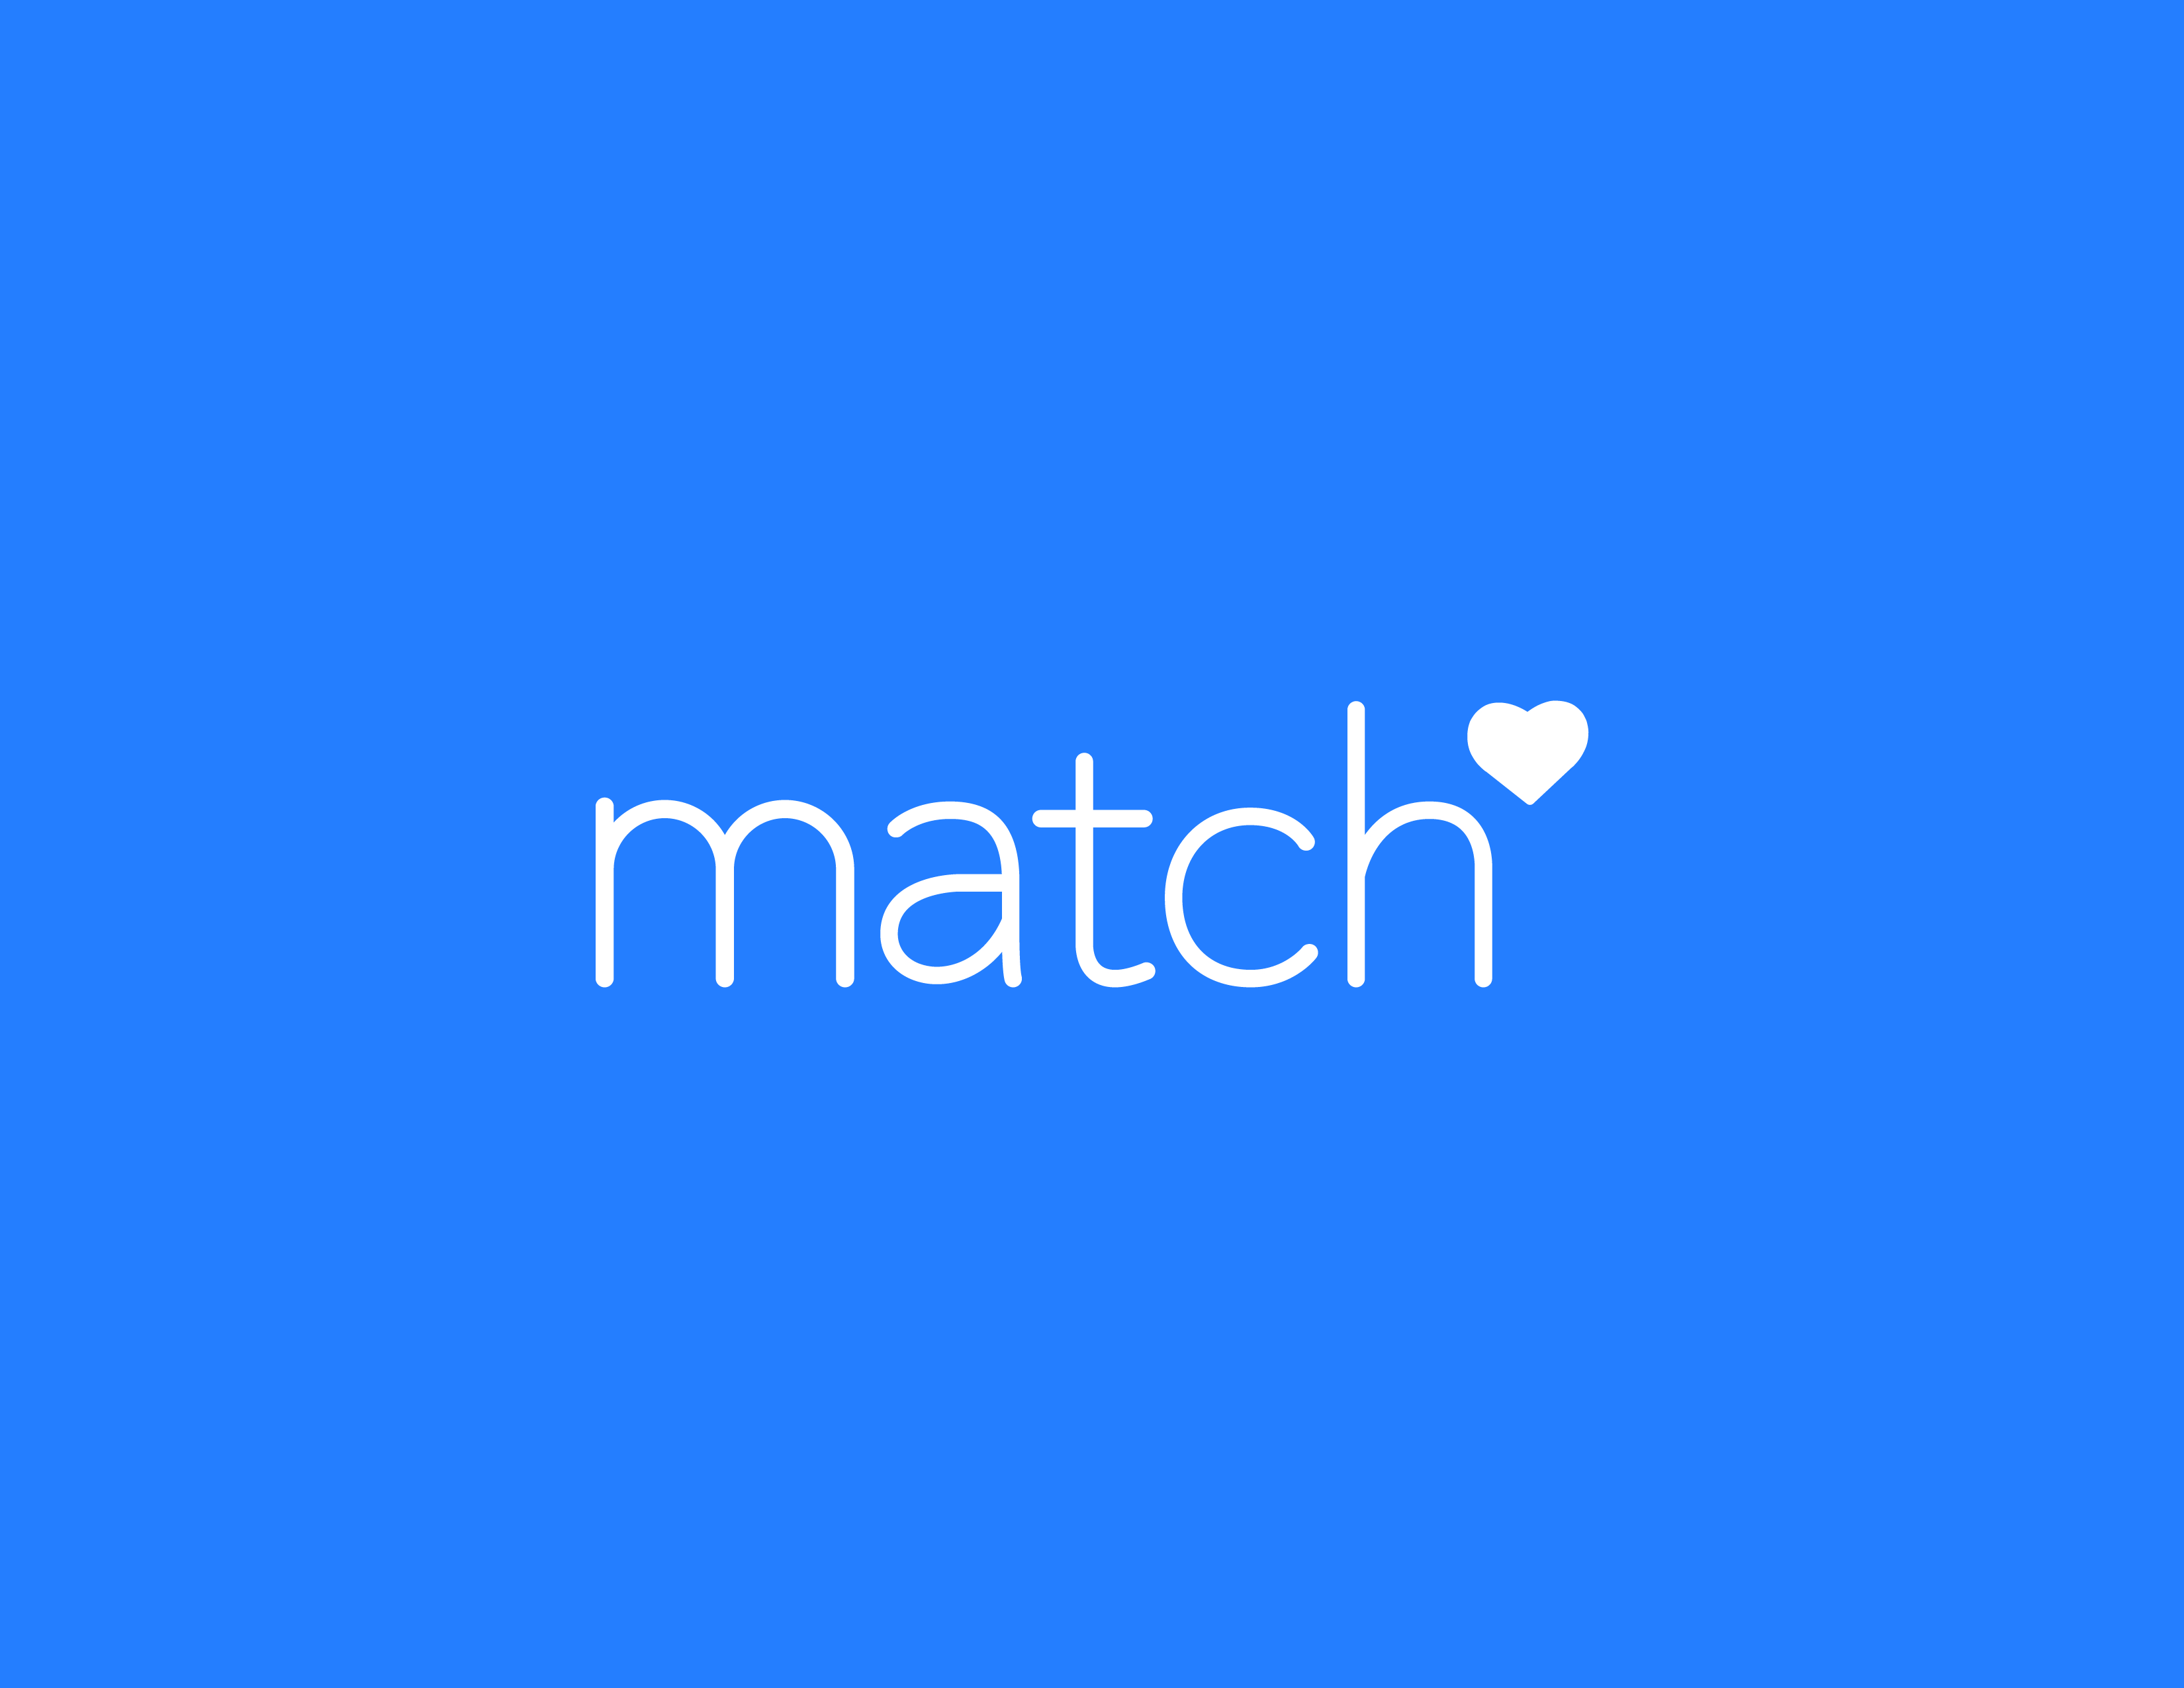 Match.com Class Action Says Dating Website Inaccessible to Blind Users